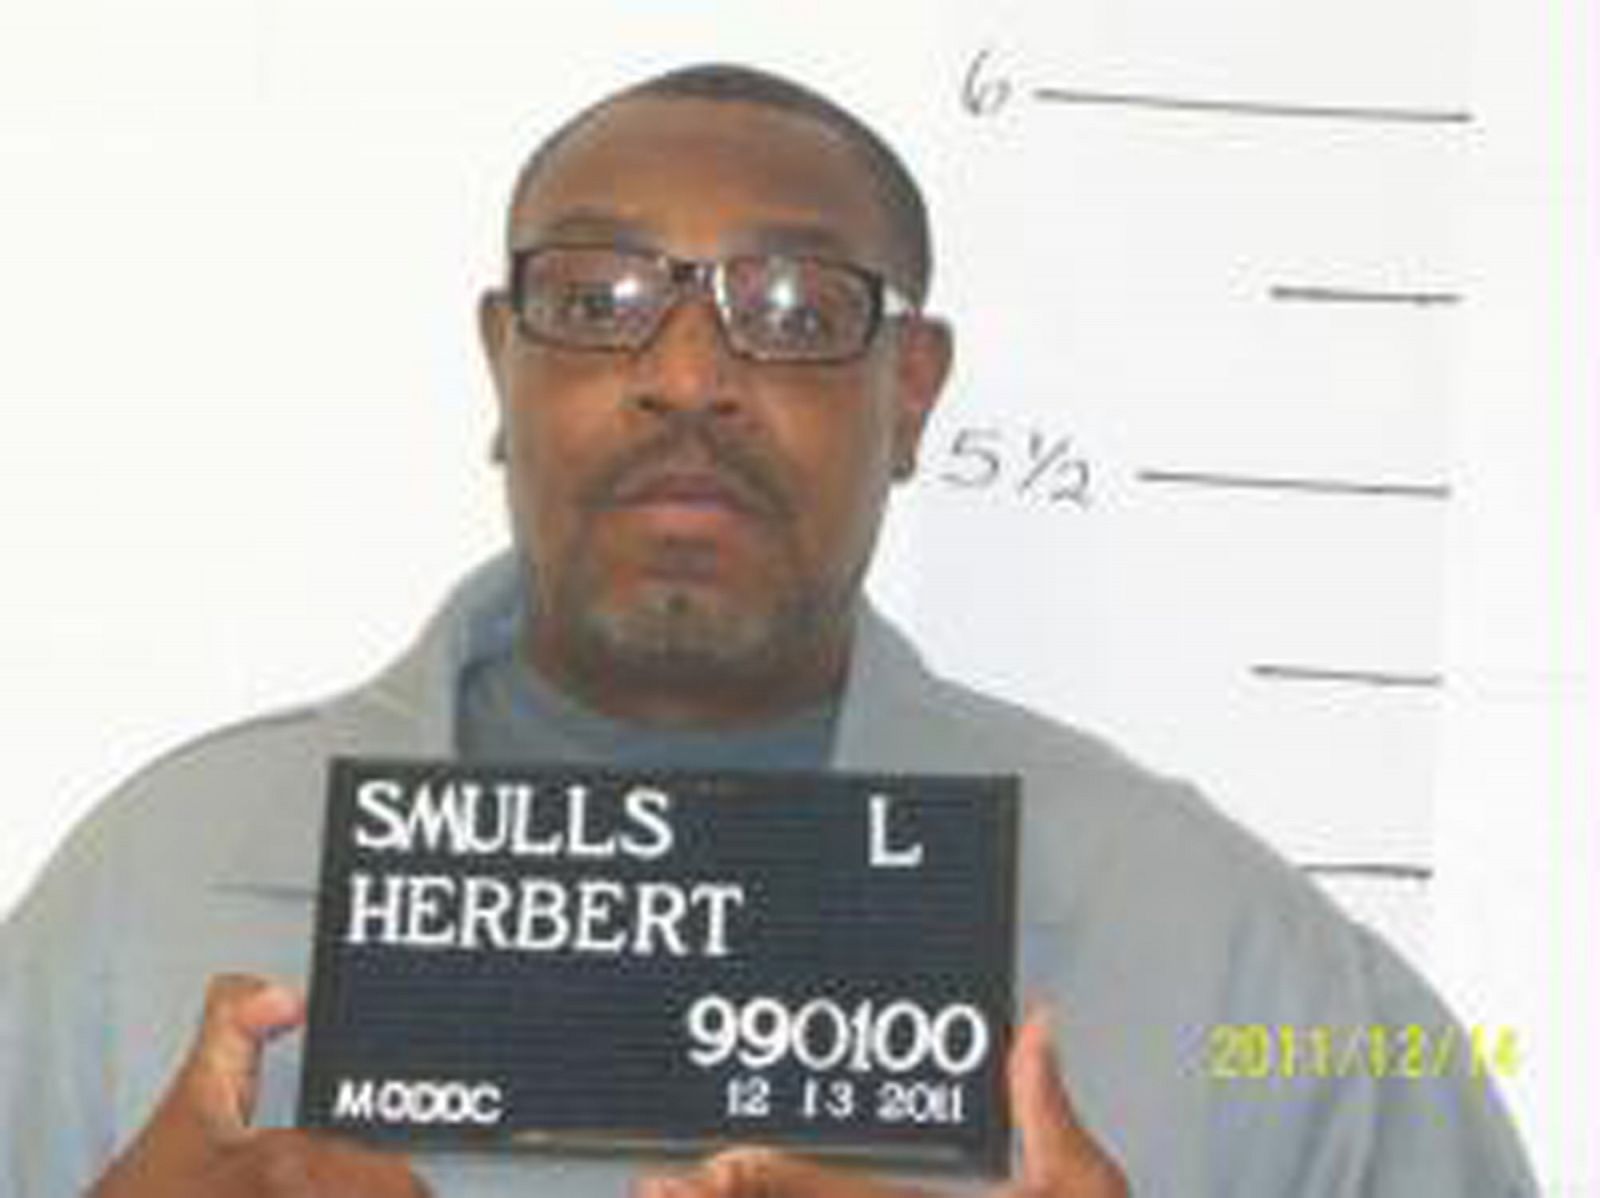 Missouri Department of Corrections photo of Herbert Smulls who was scheduled to be executed